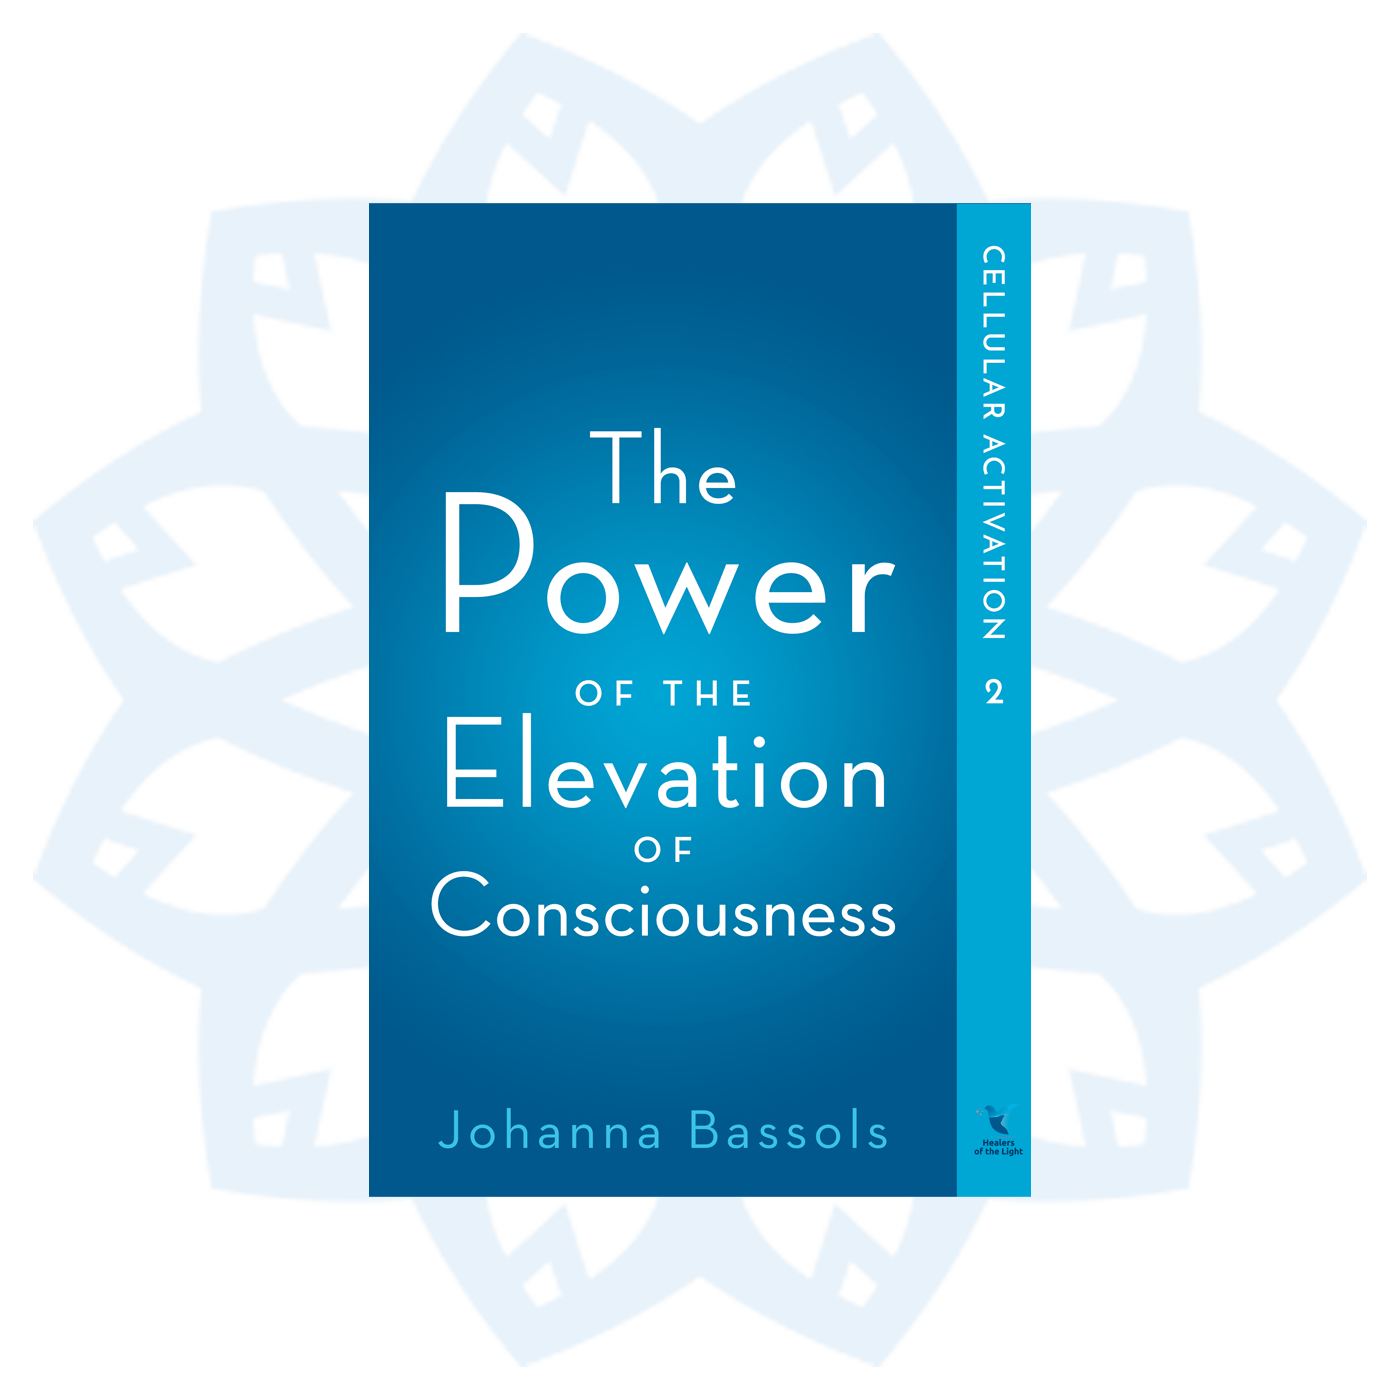 Trilogy Paperback: The Power of the Elevation of Consciousness